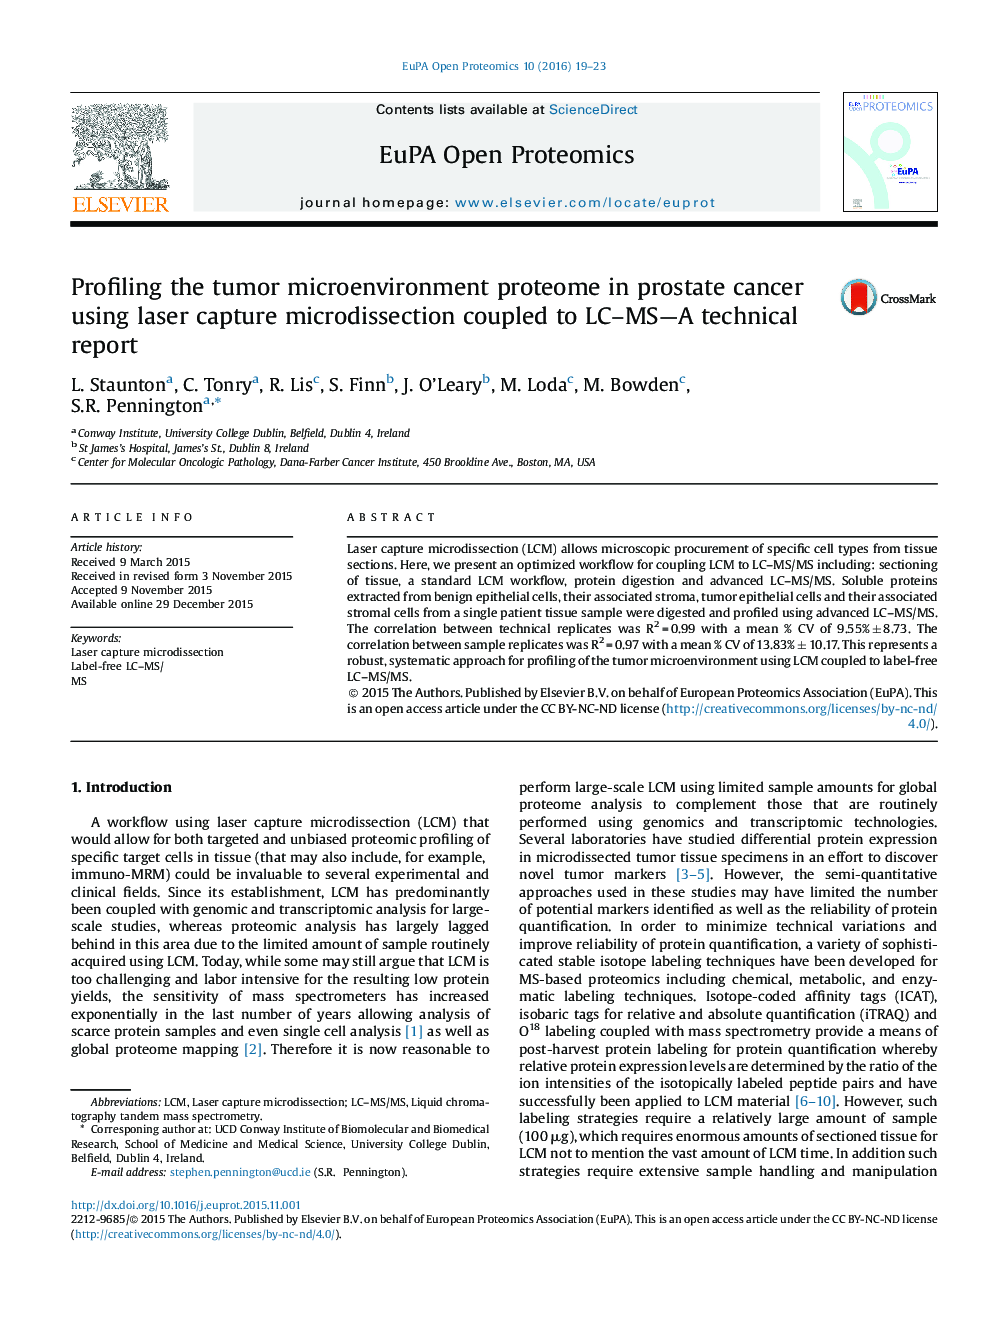 Profiling the tumor microenvironment proteome in prostate cancer using laser capture microdissection coupled to LC–MS—A technical report